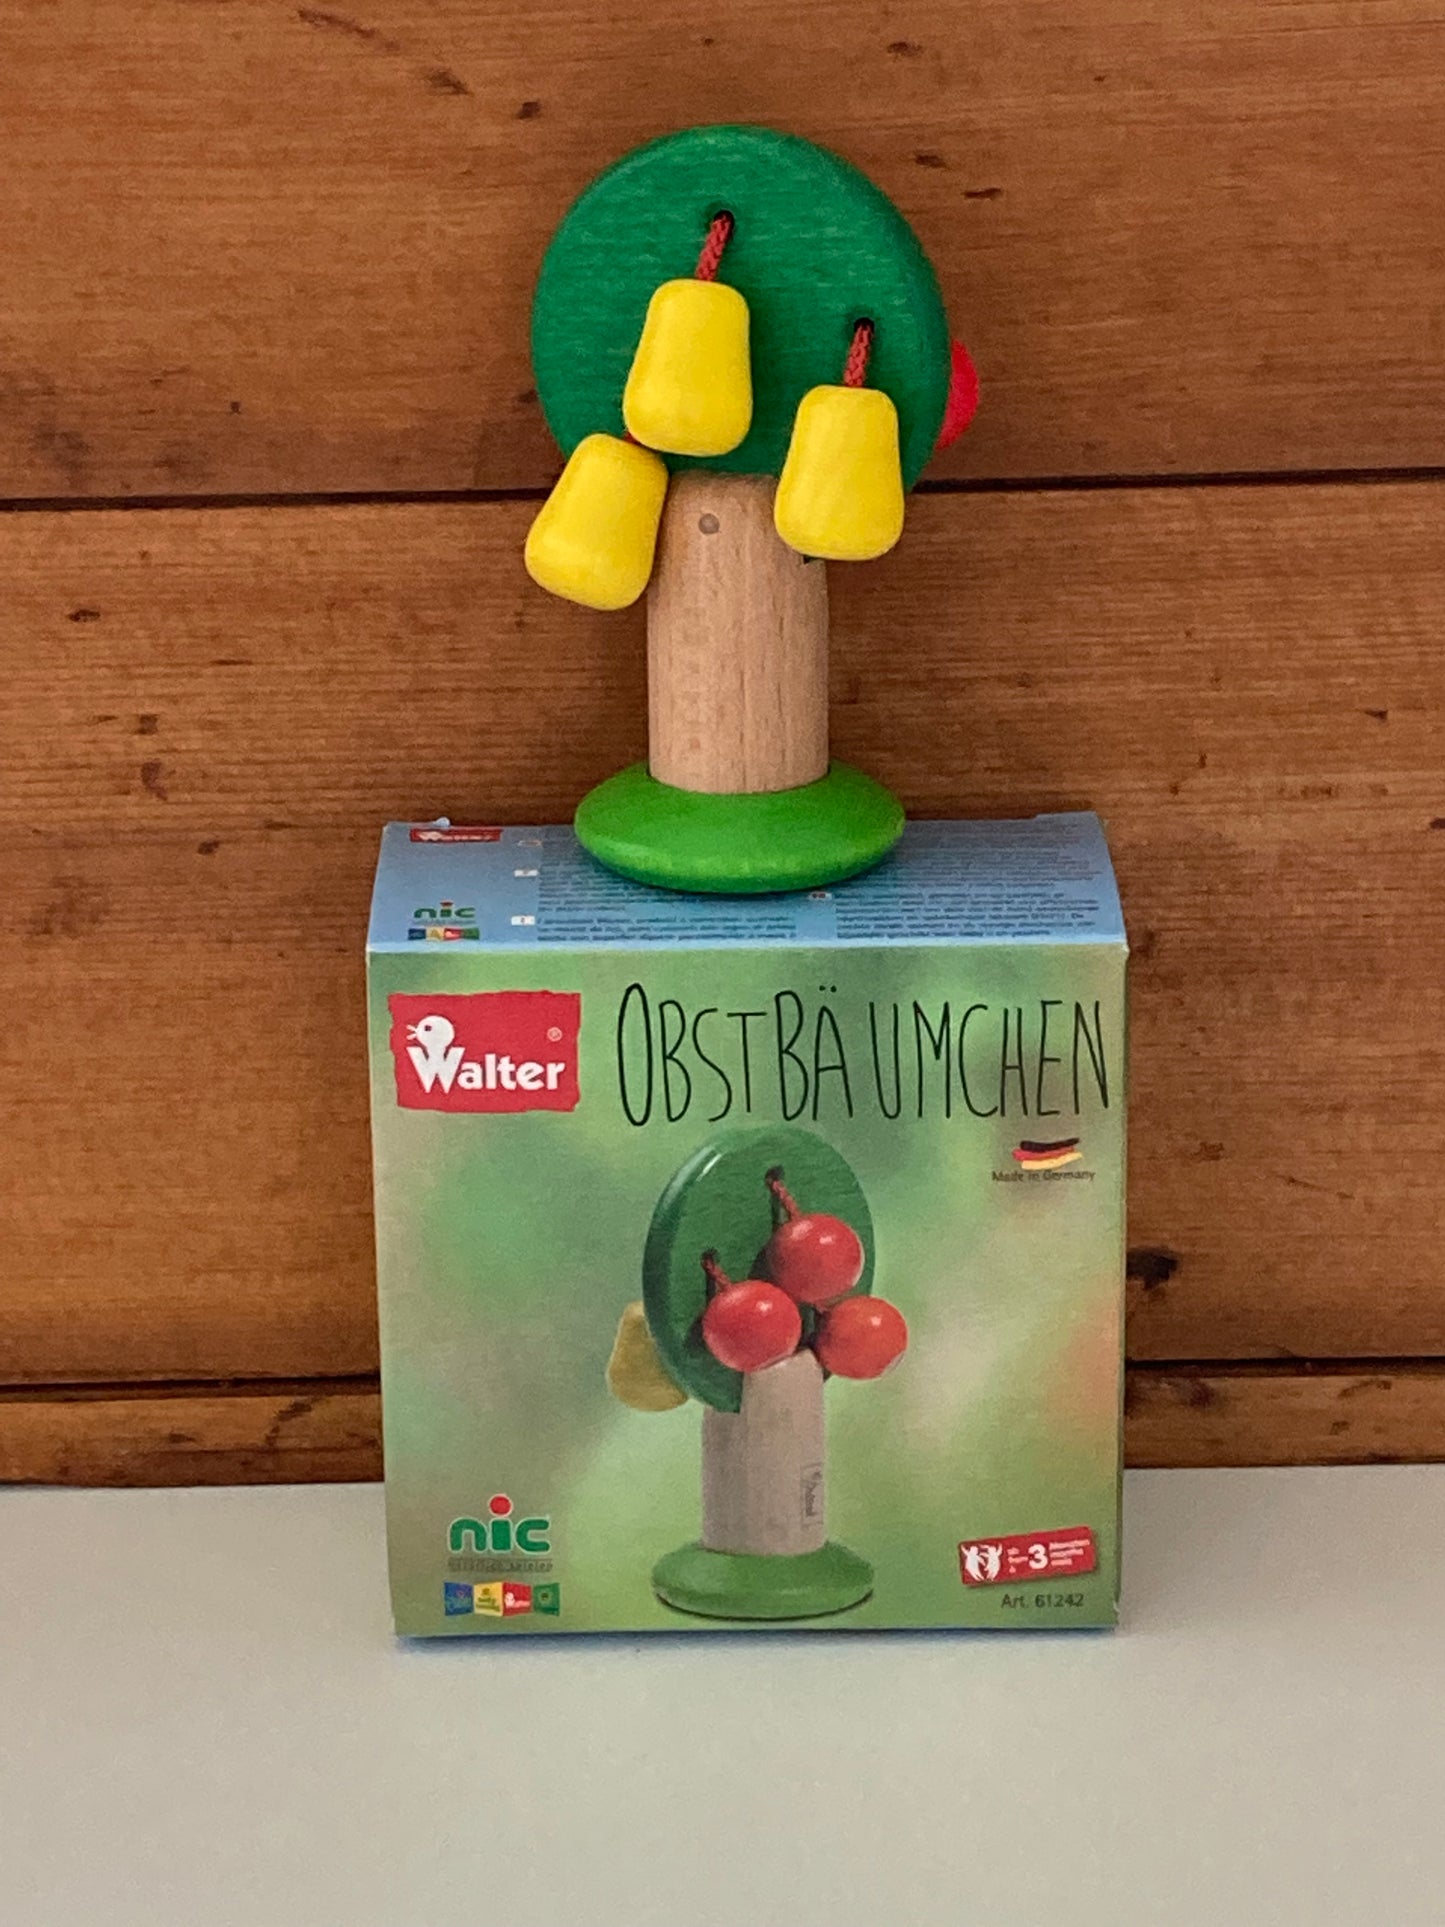 Wooden Toy, Baby - LITTLE FRUIT TREE